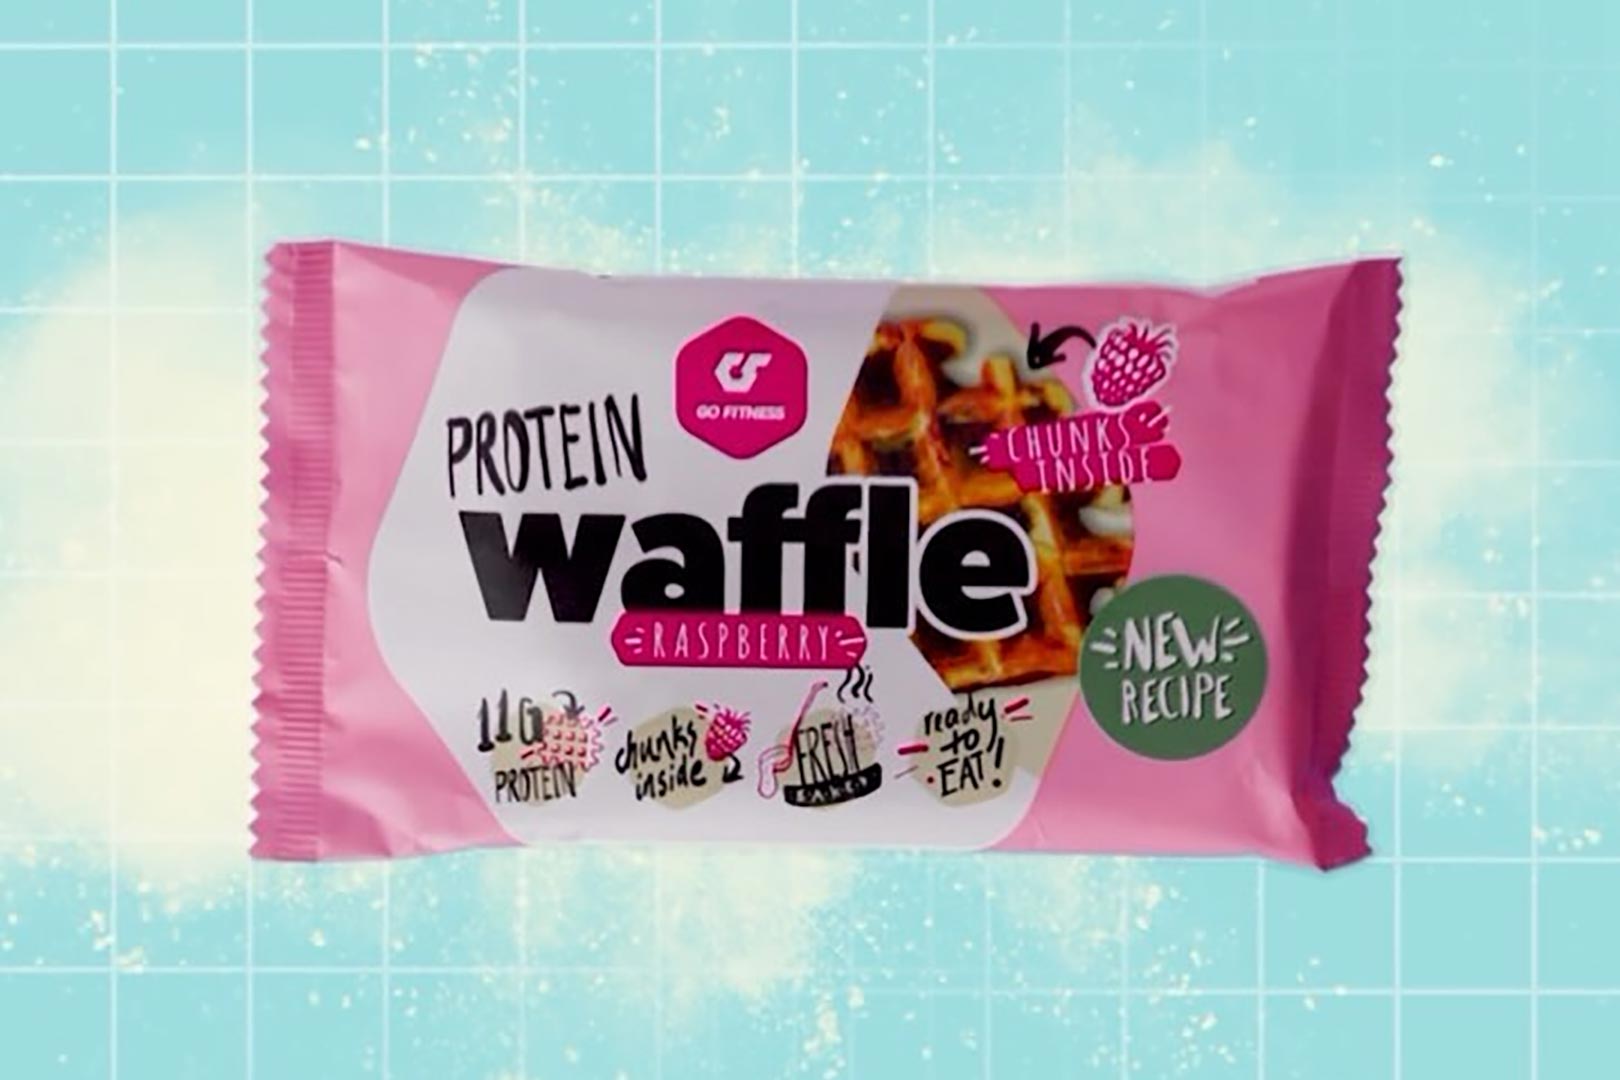 Go Fitness Improved Protein Waffle